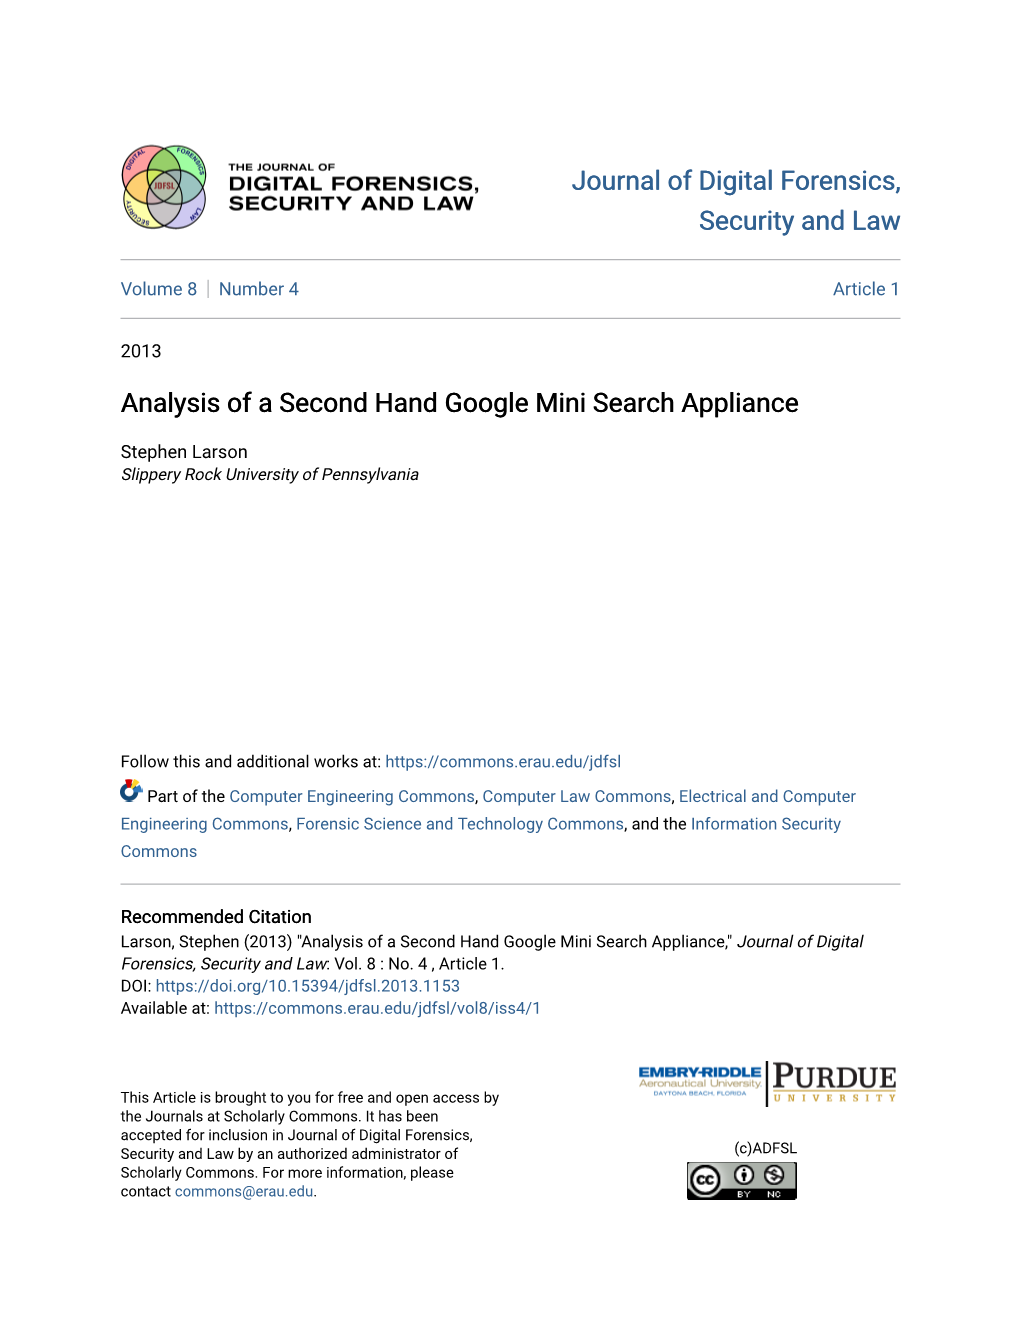 Analysis of a Second Hand Google Mini Search Appliance